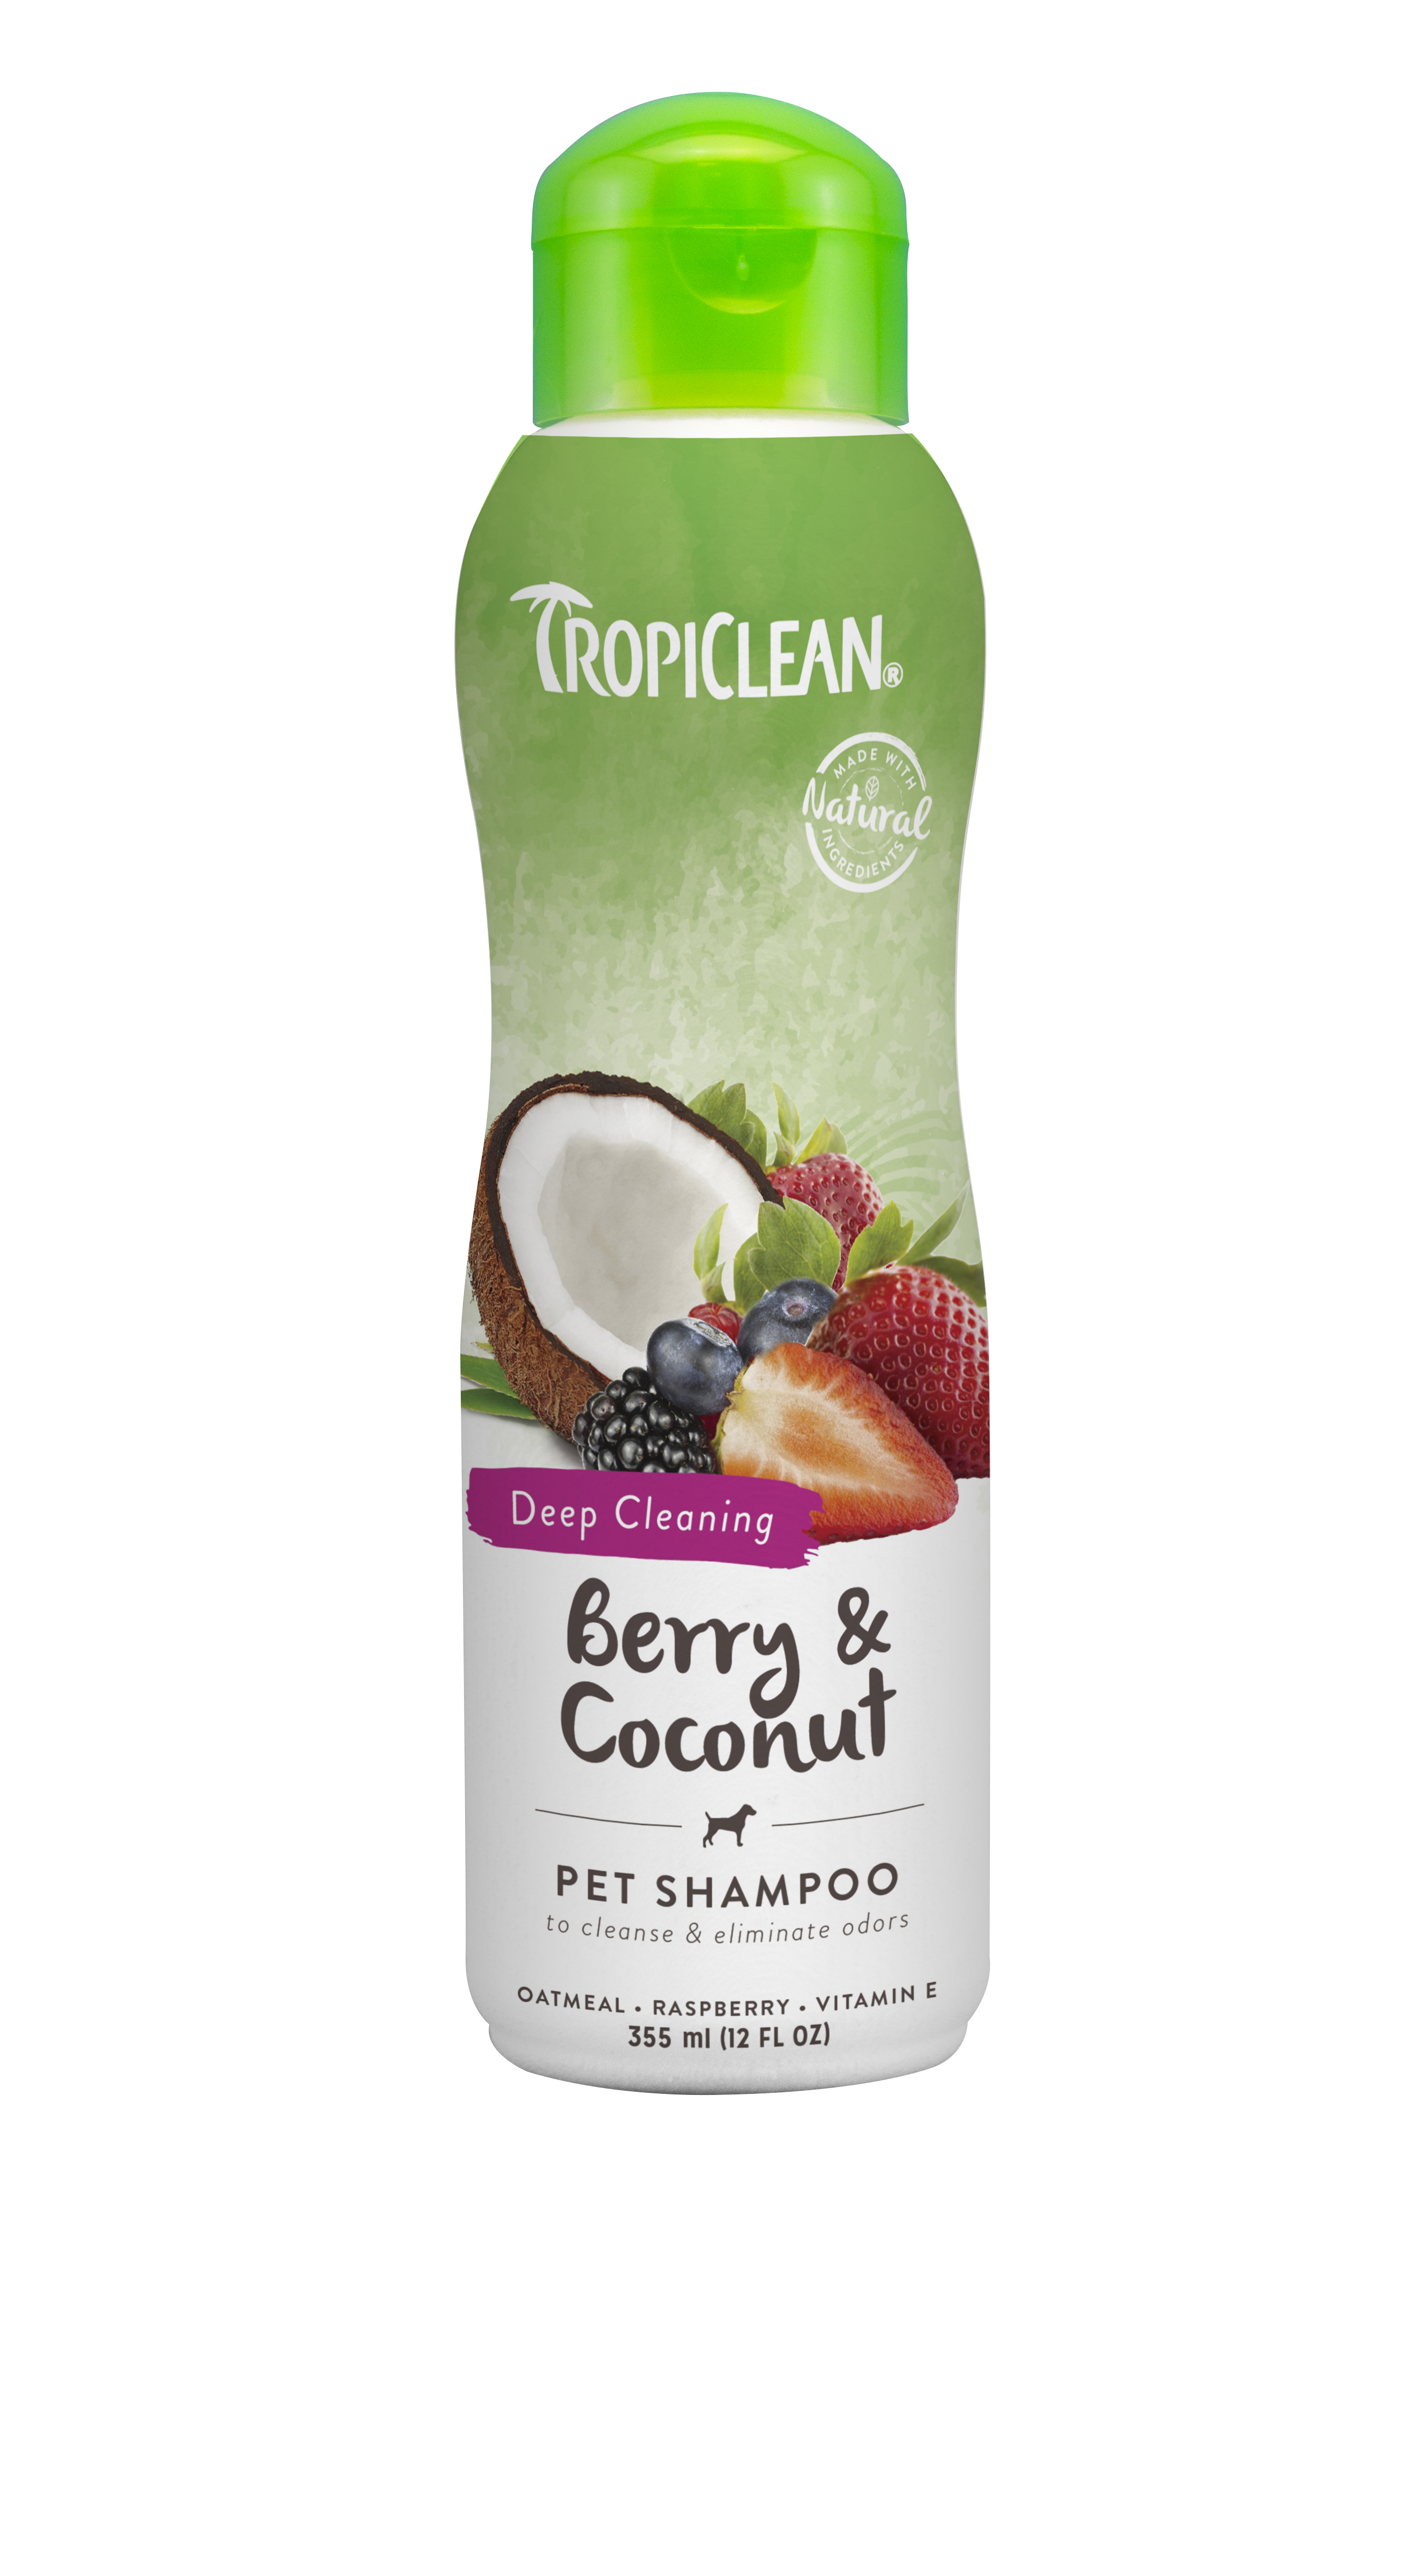 Tropiclean Berry and Coconut Shampoo (Deep Cleaning)